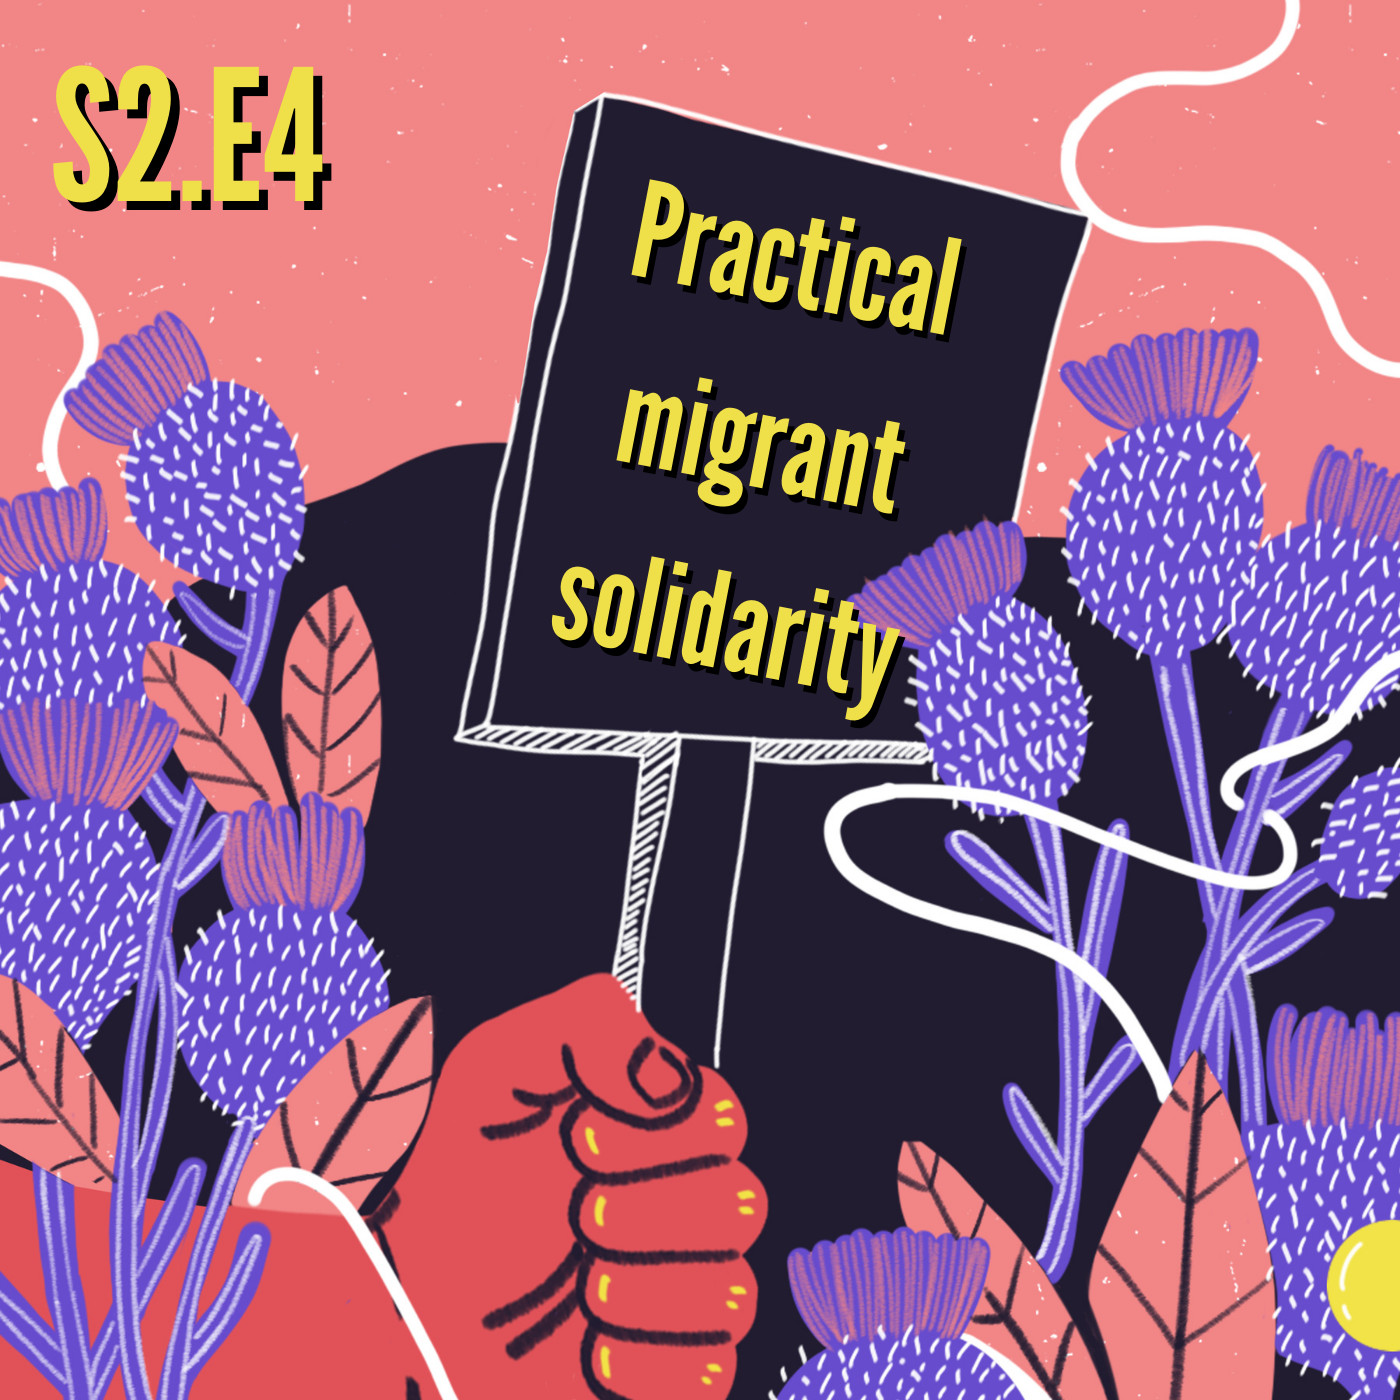 Practical migrant solidarity (Savan from No Evictions Network)